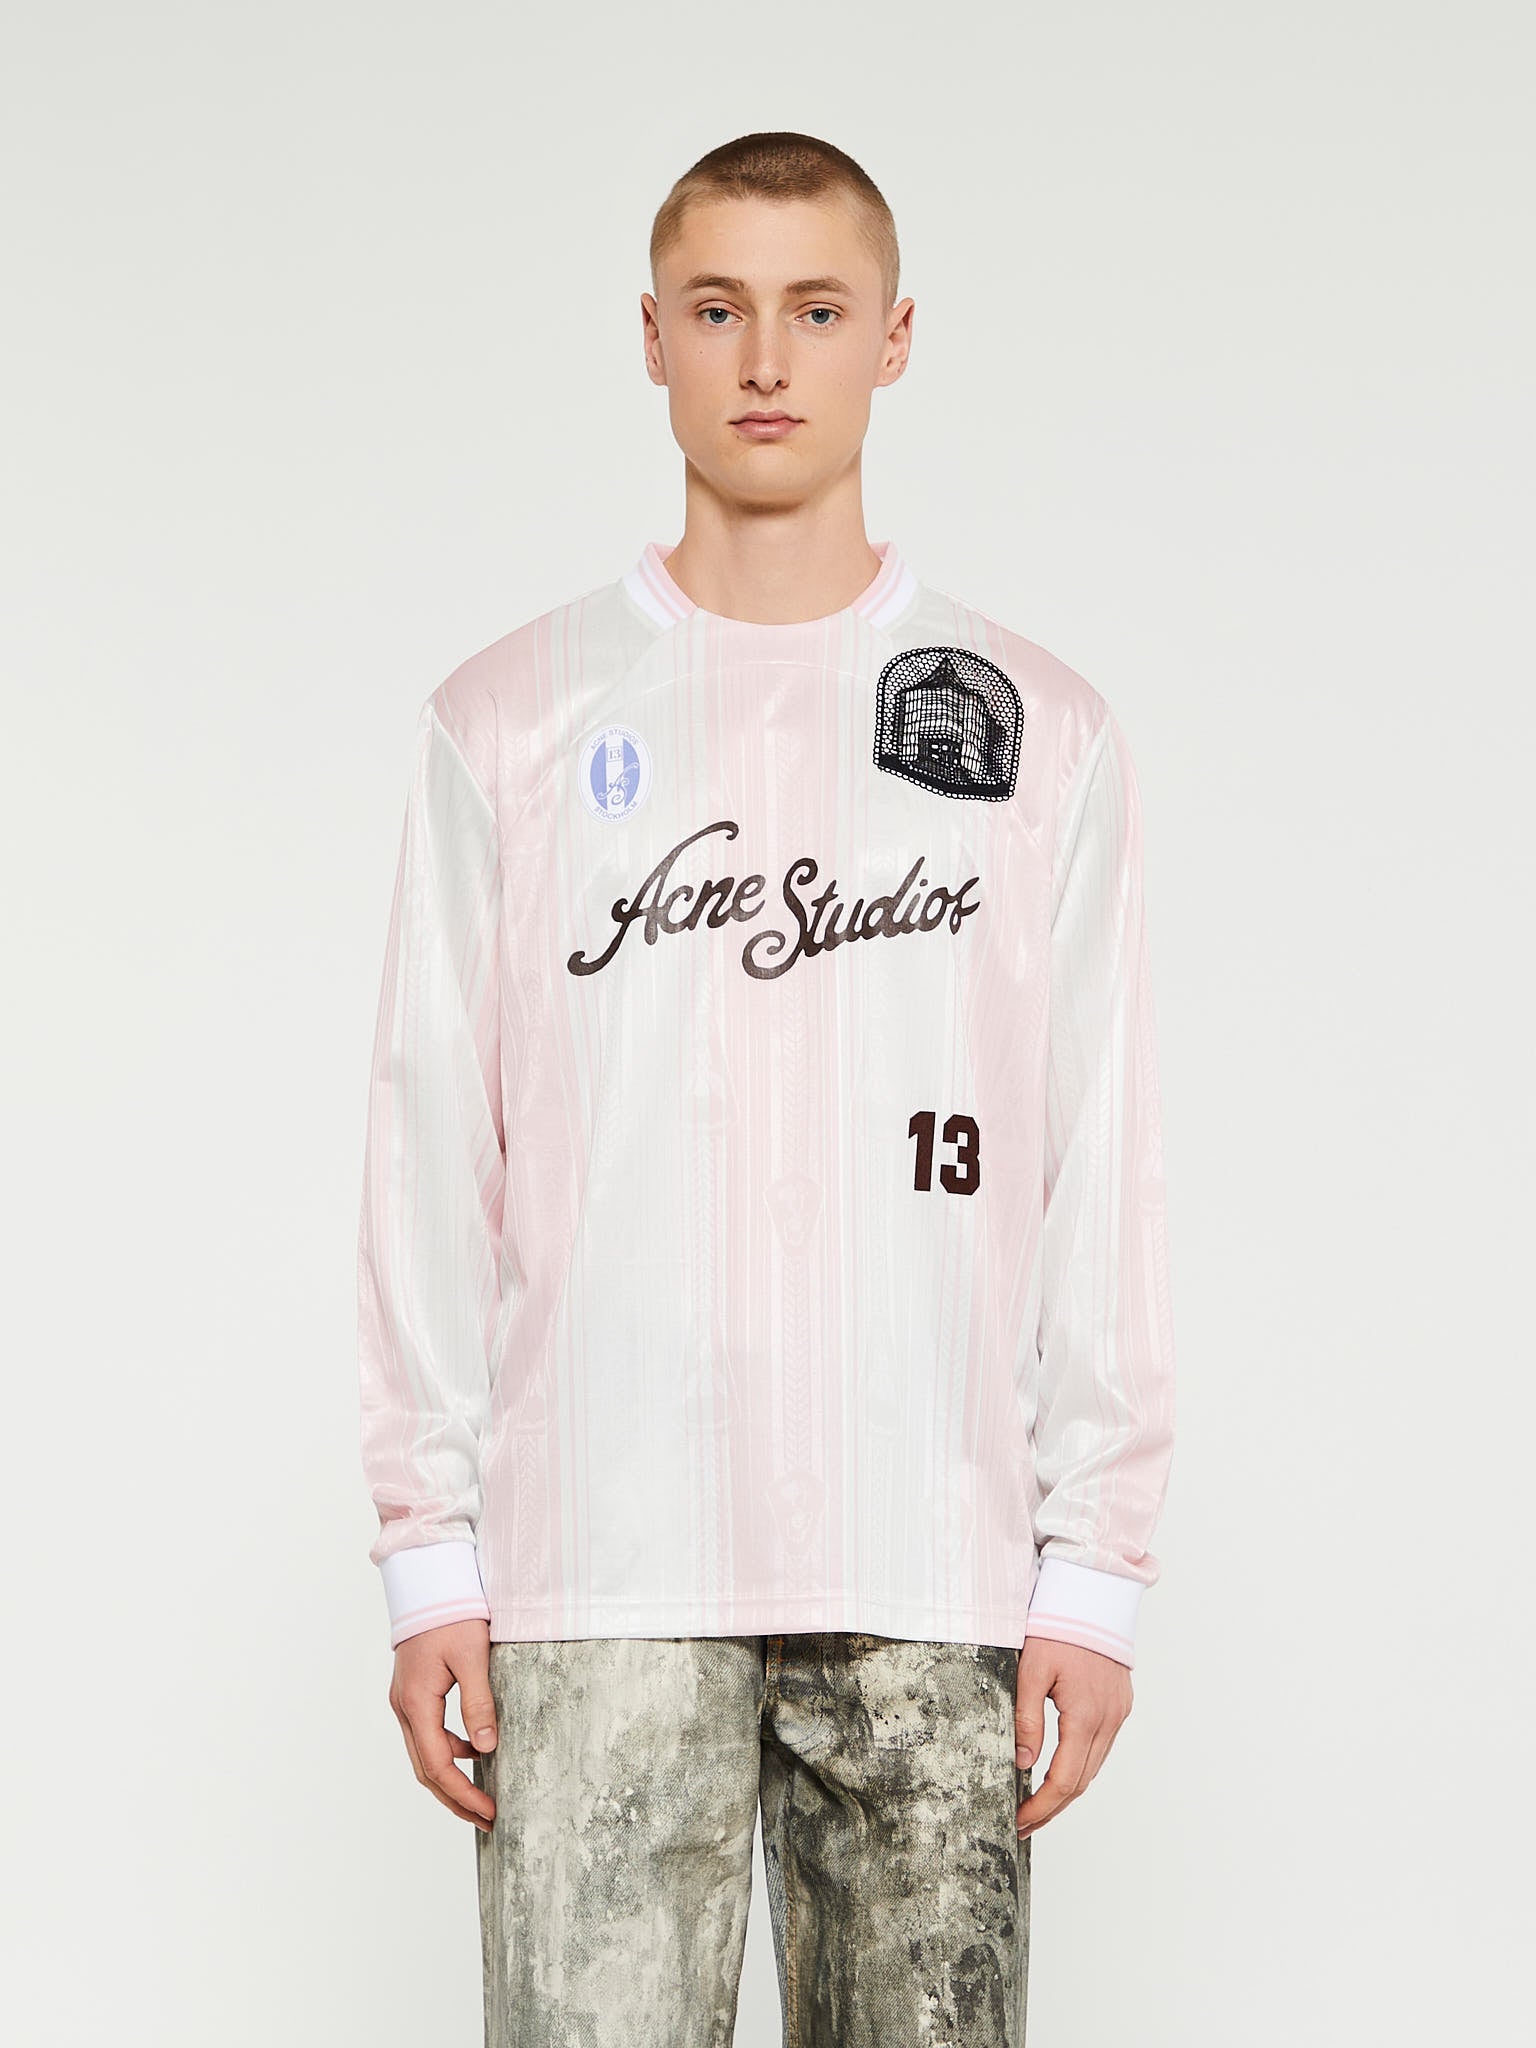 Acne Studios - Logo Longsleeved T-shirt Pink and White